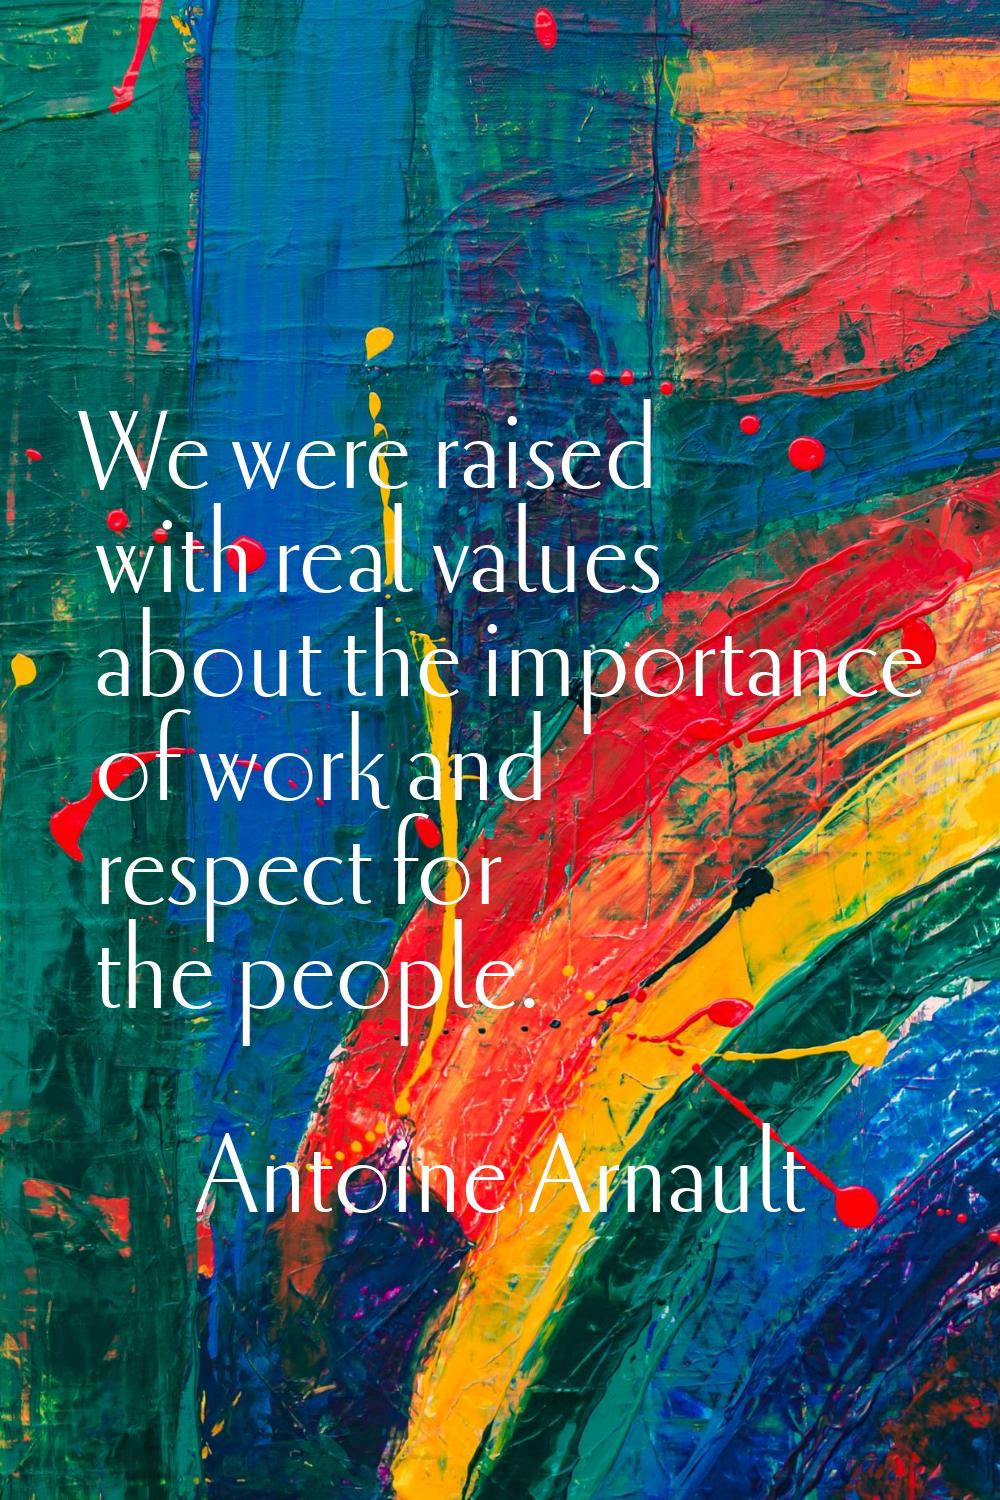 We were raised with real values about the importance of work and respect for the people.